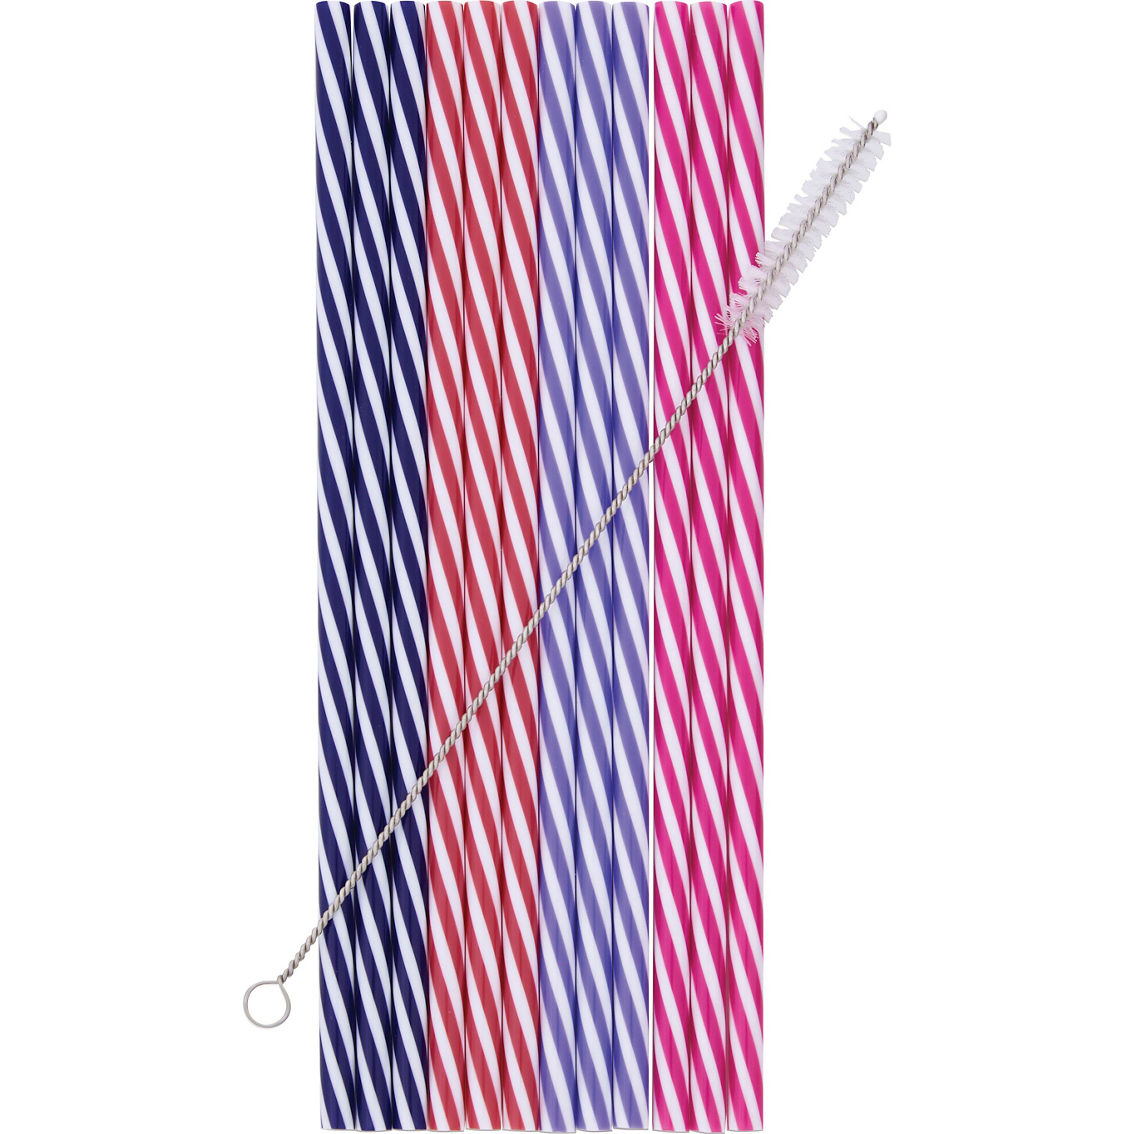 Copco Reusable Straws with Cleaner 12 pc. Set - Image 2 of 3